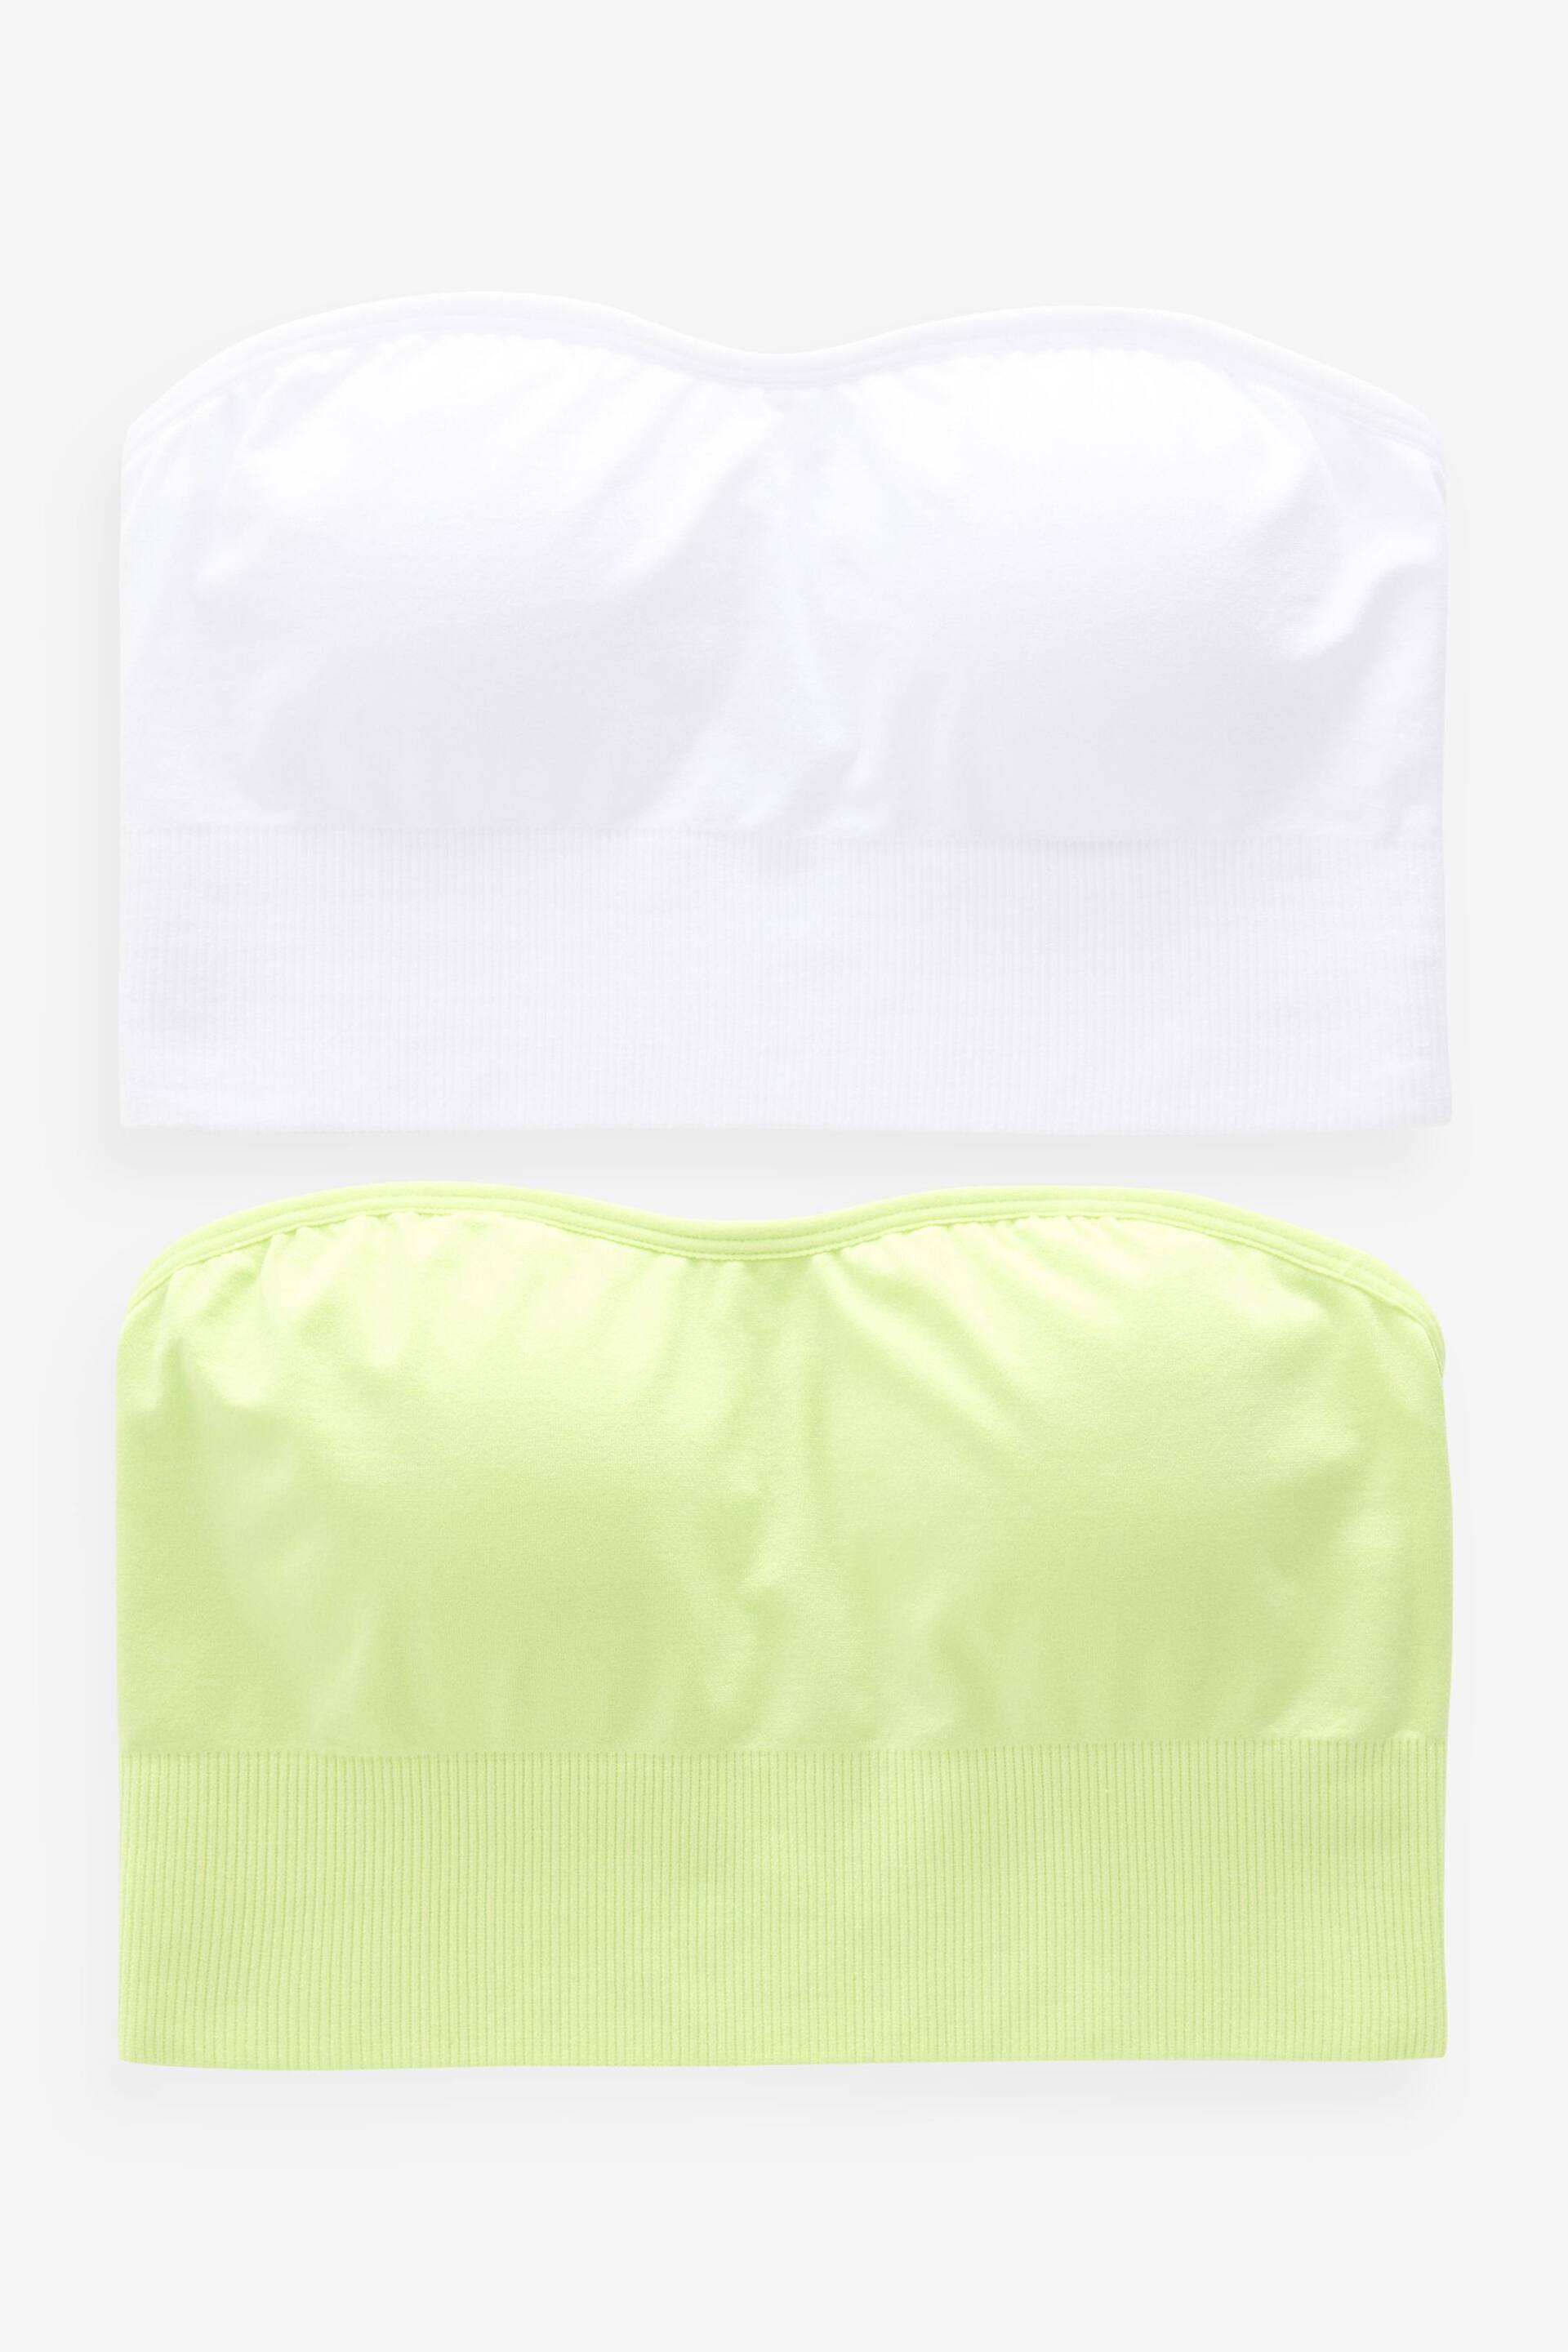 White/Lime Green Seamfree Bandeau Bras 2 Pack - Image 7 of 10